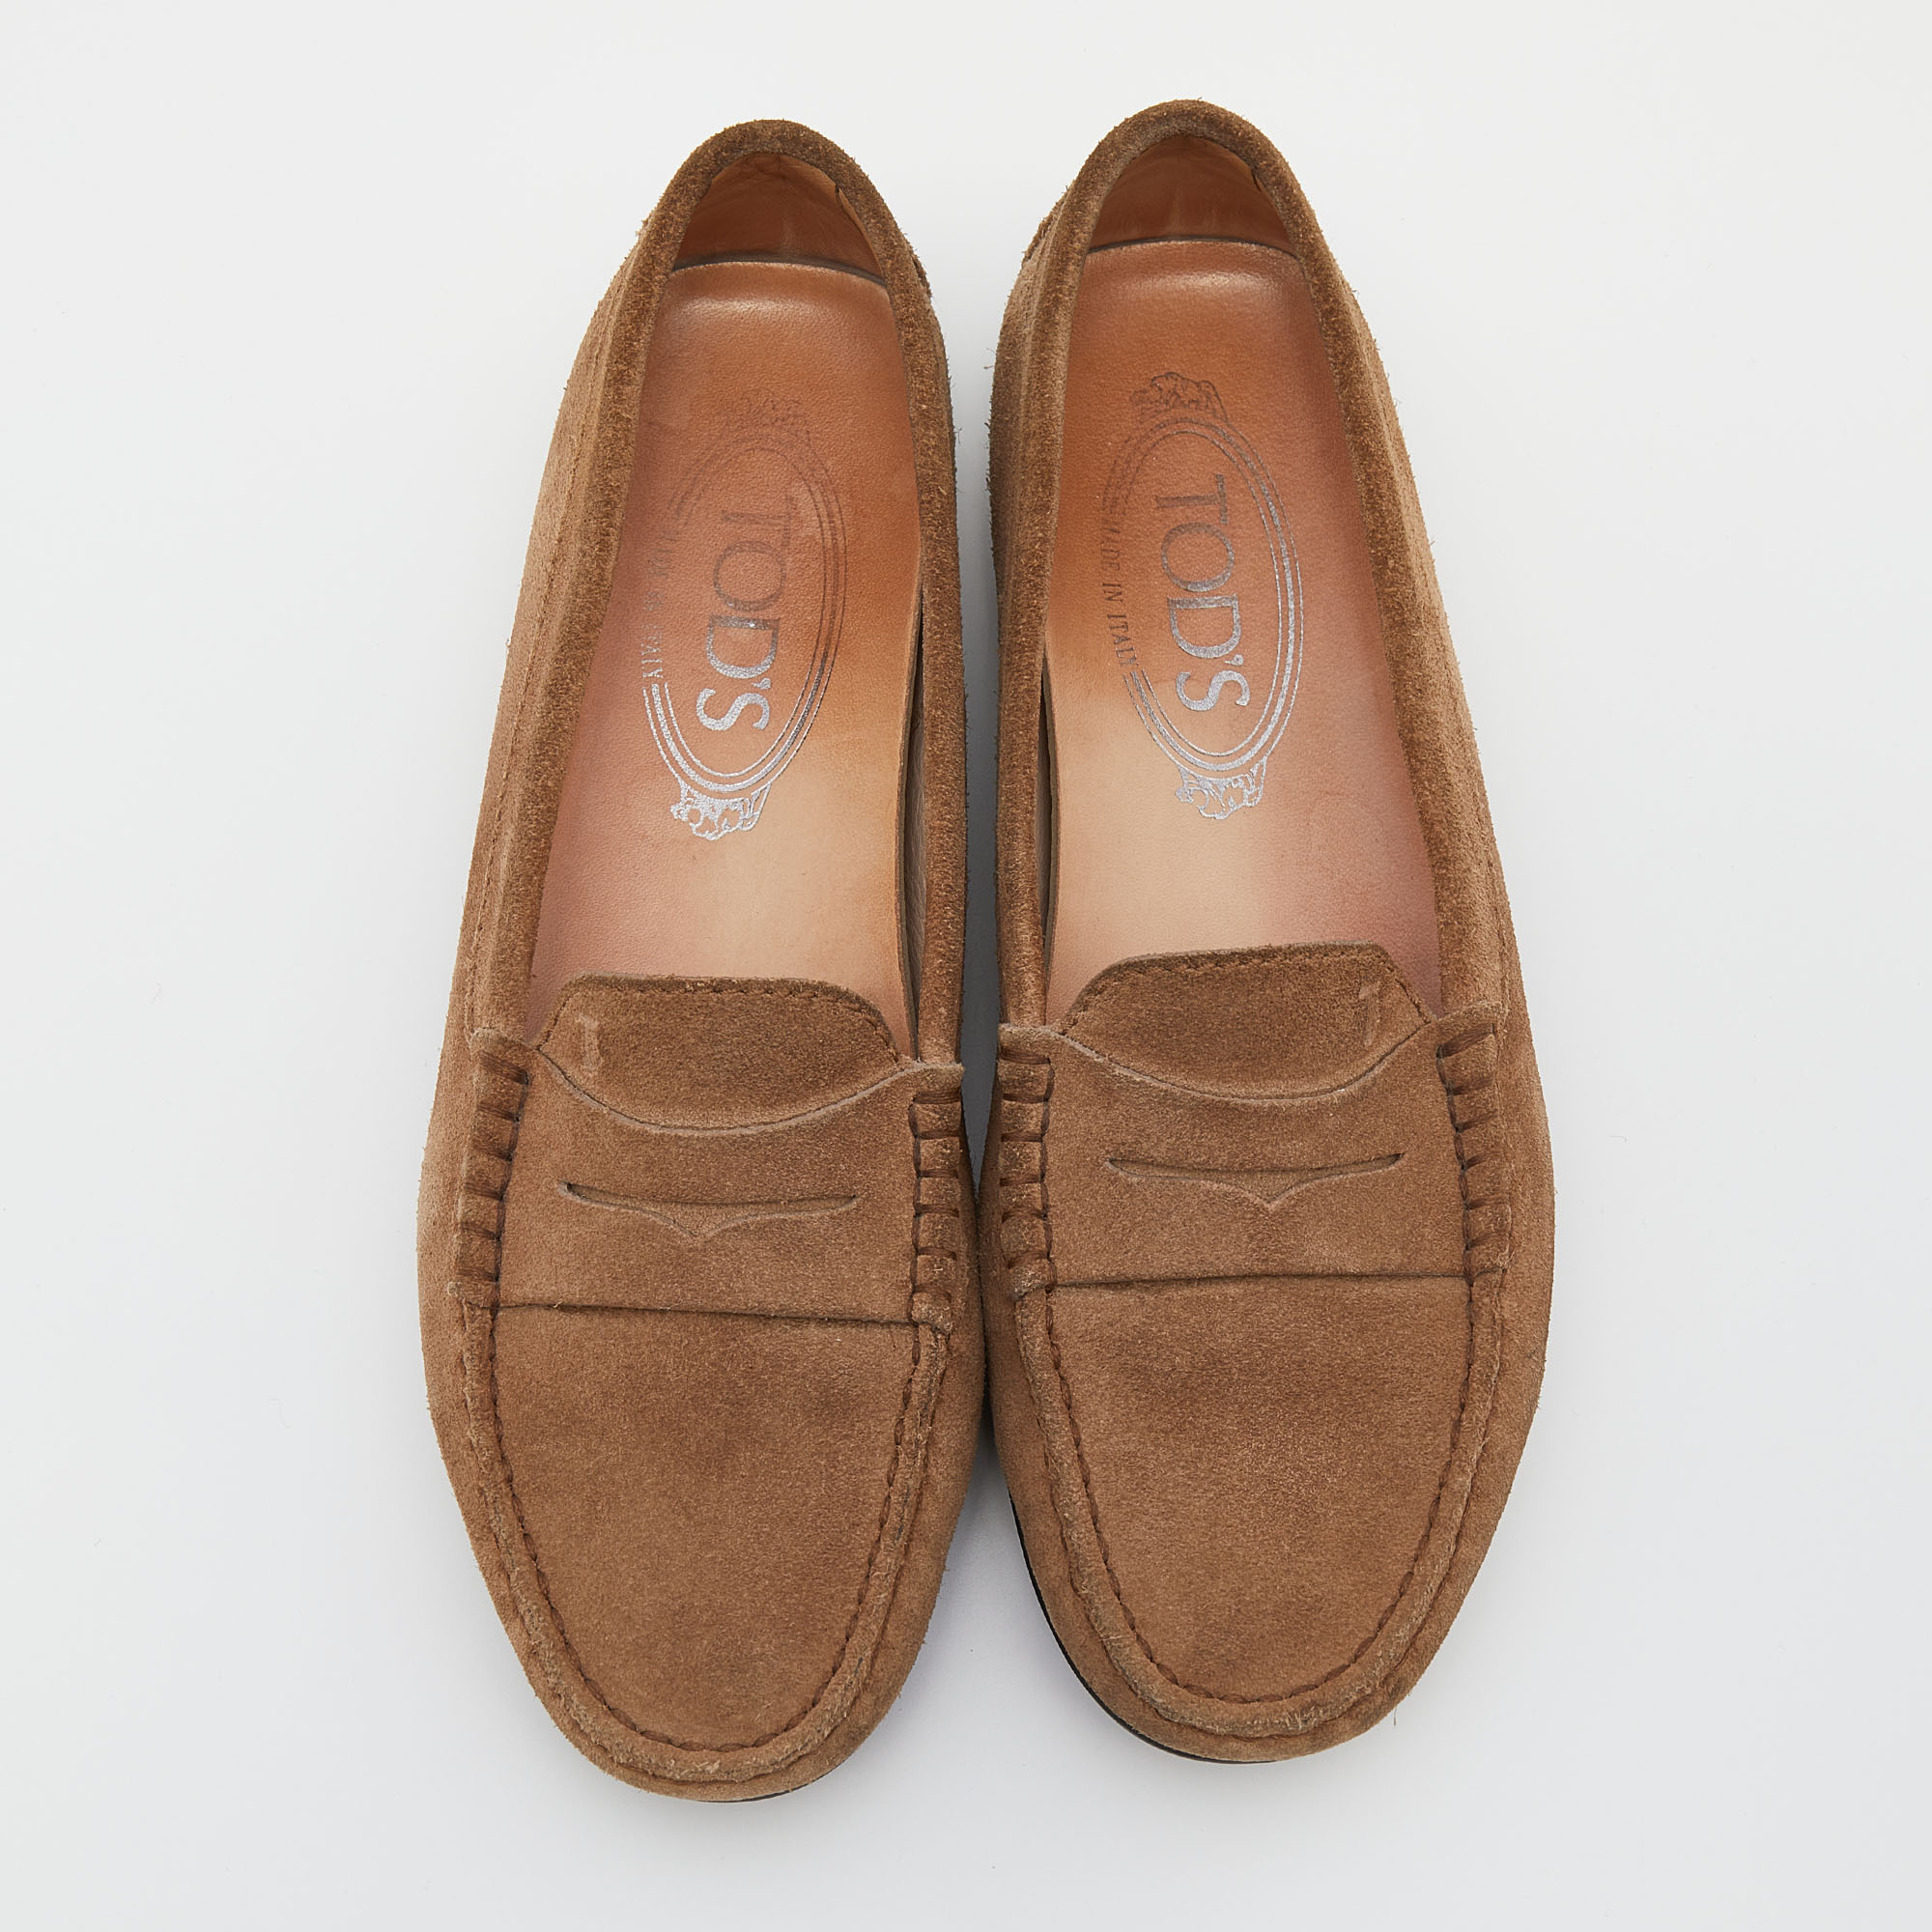 Tod's Light Brown Suede Slip On Loafers Size 35